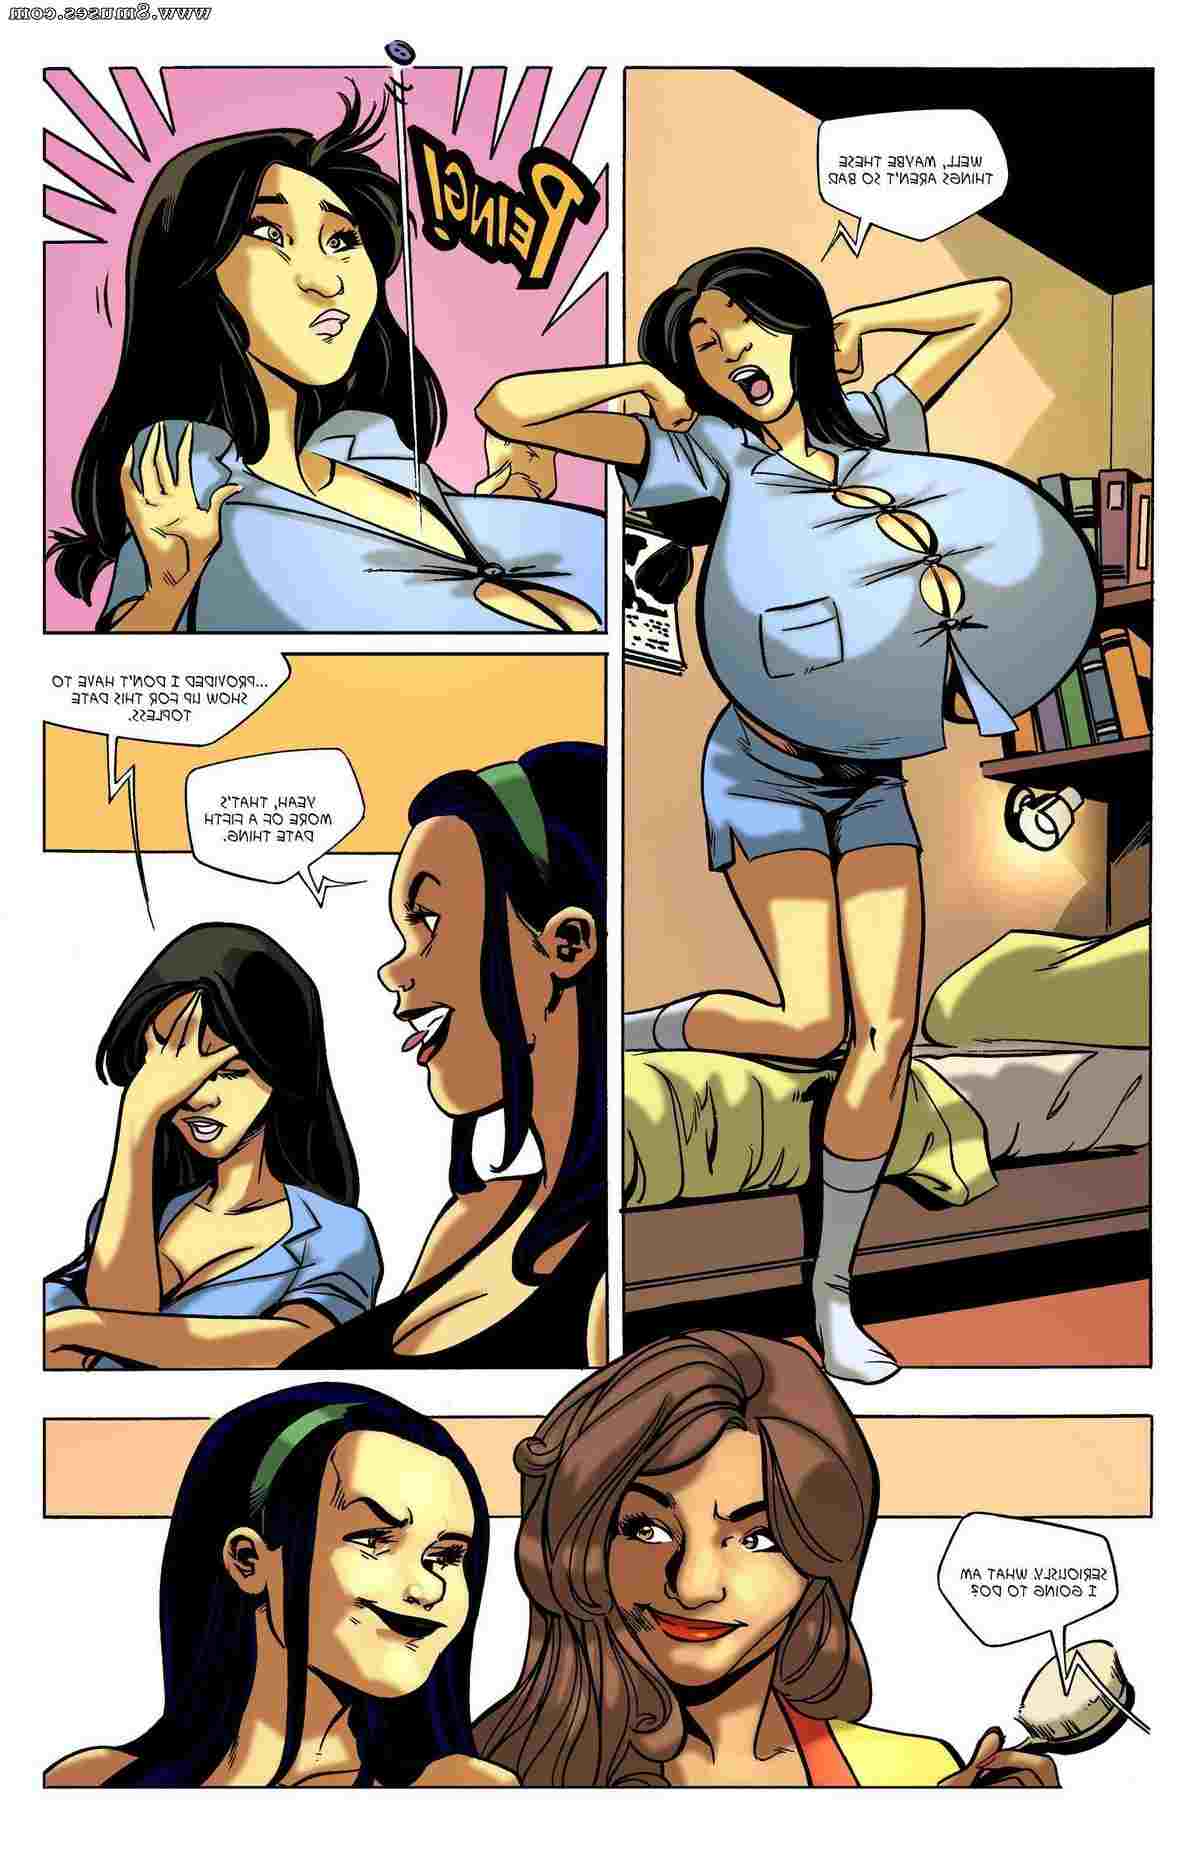 BE-Story-Club-Comics/Welcome-to-Chastity Welcome_to_Chastity__8muses_-_Sex_and_Porn_Comics_75.jpg